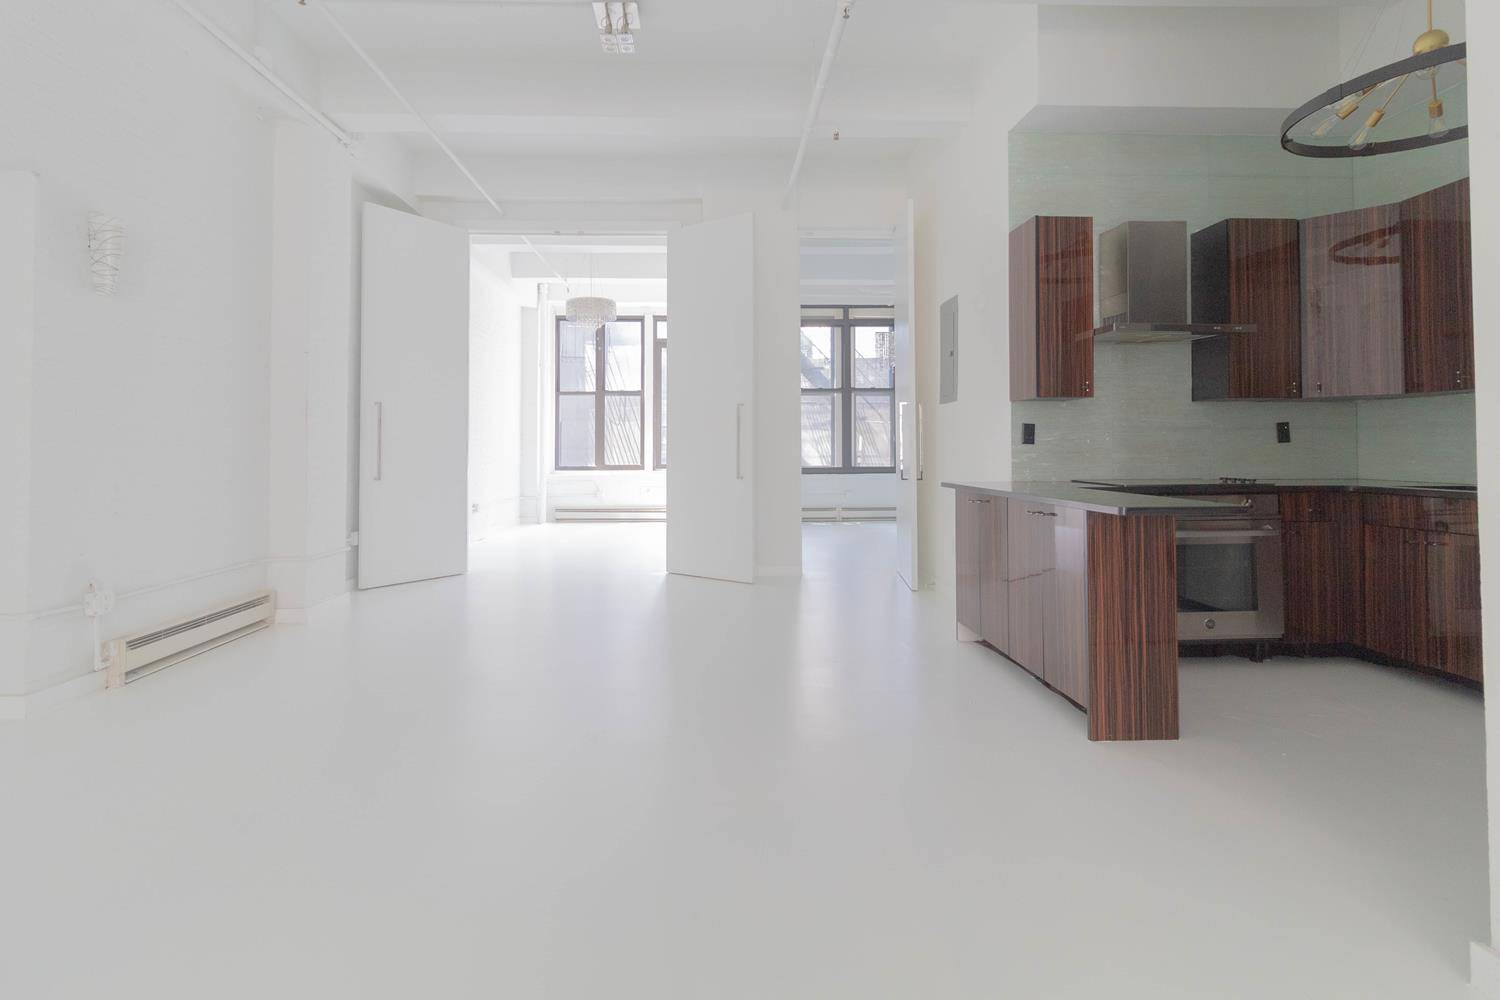 North TriBeCa loft in an elevator building, please refer to floorpan and images for details.